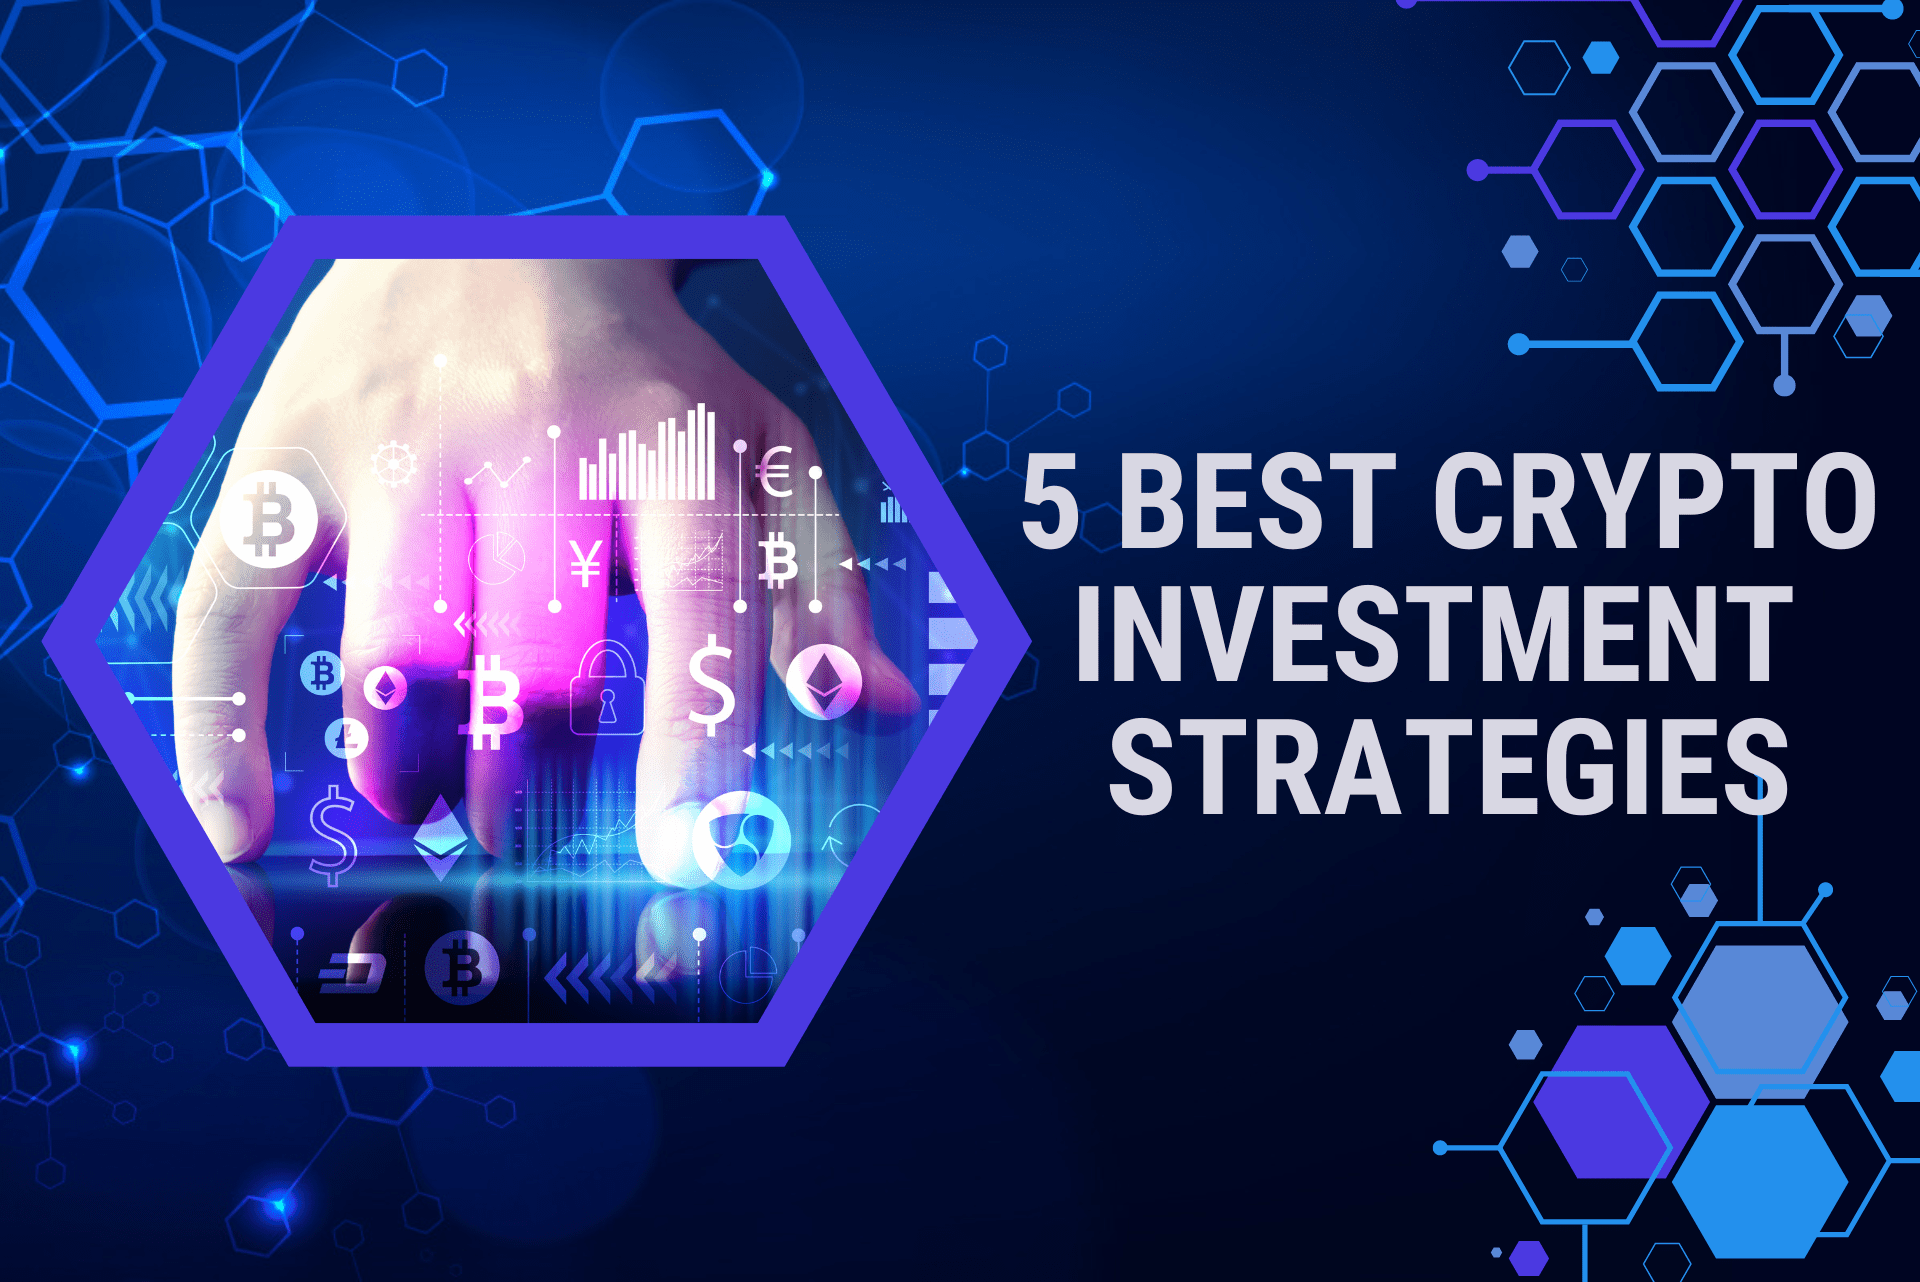 5 Best Crypto Investment Strategies for Beginners in 2023